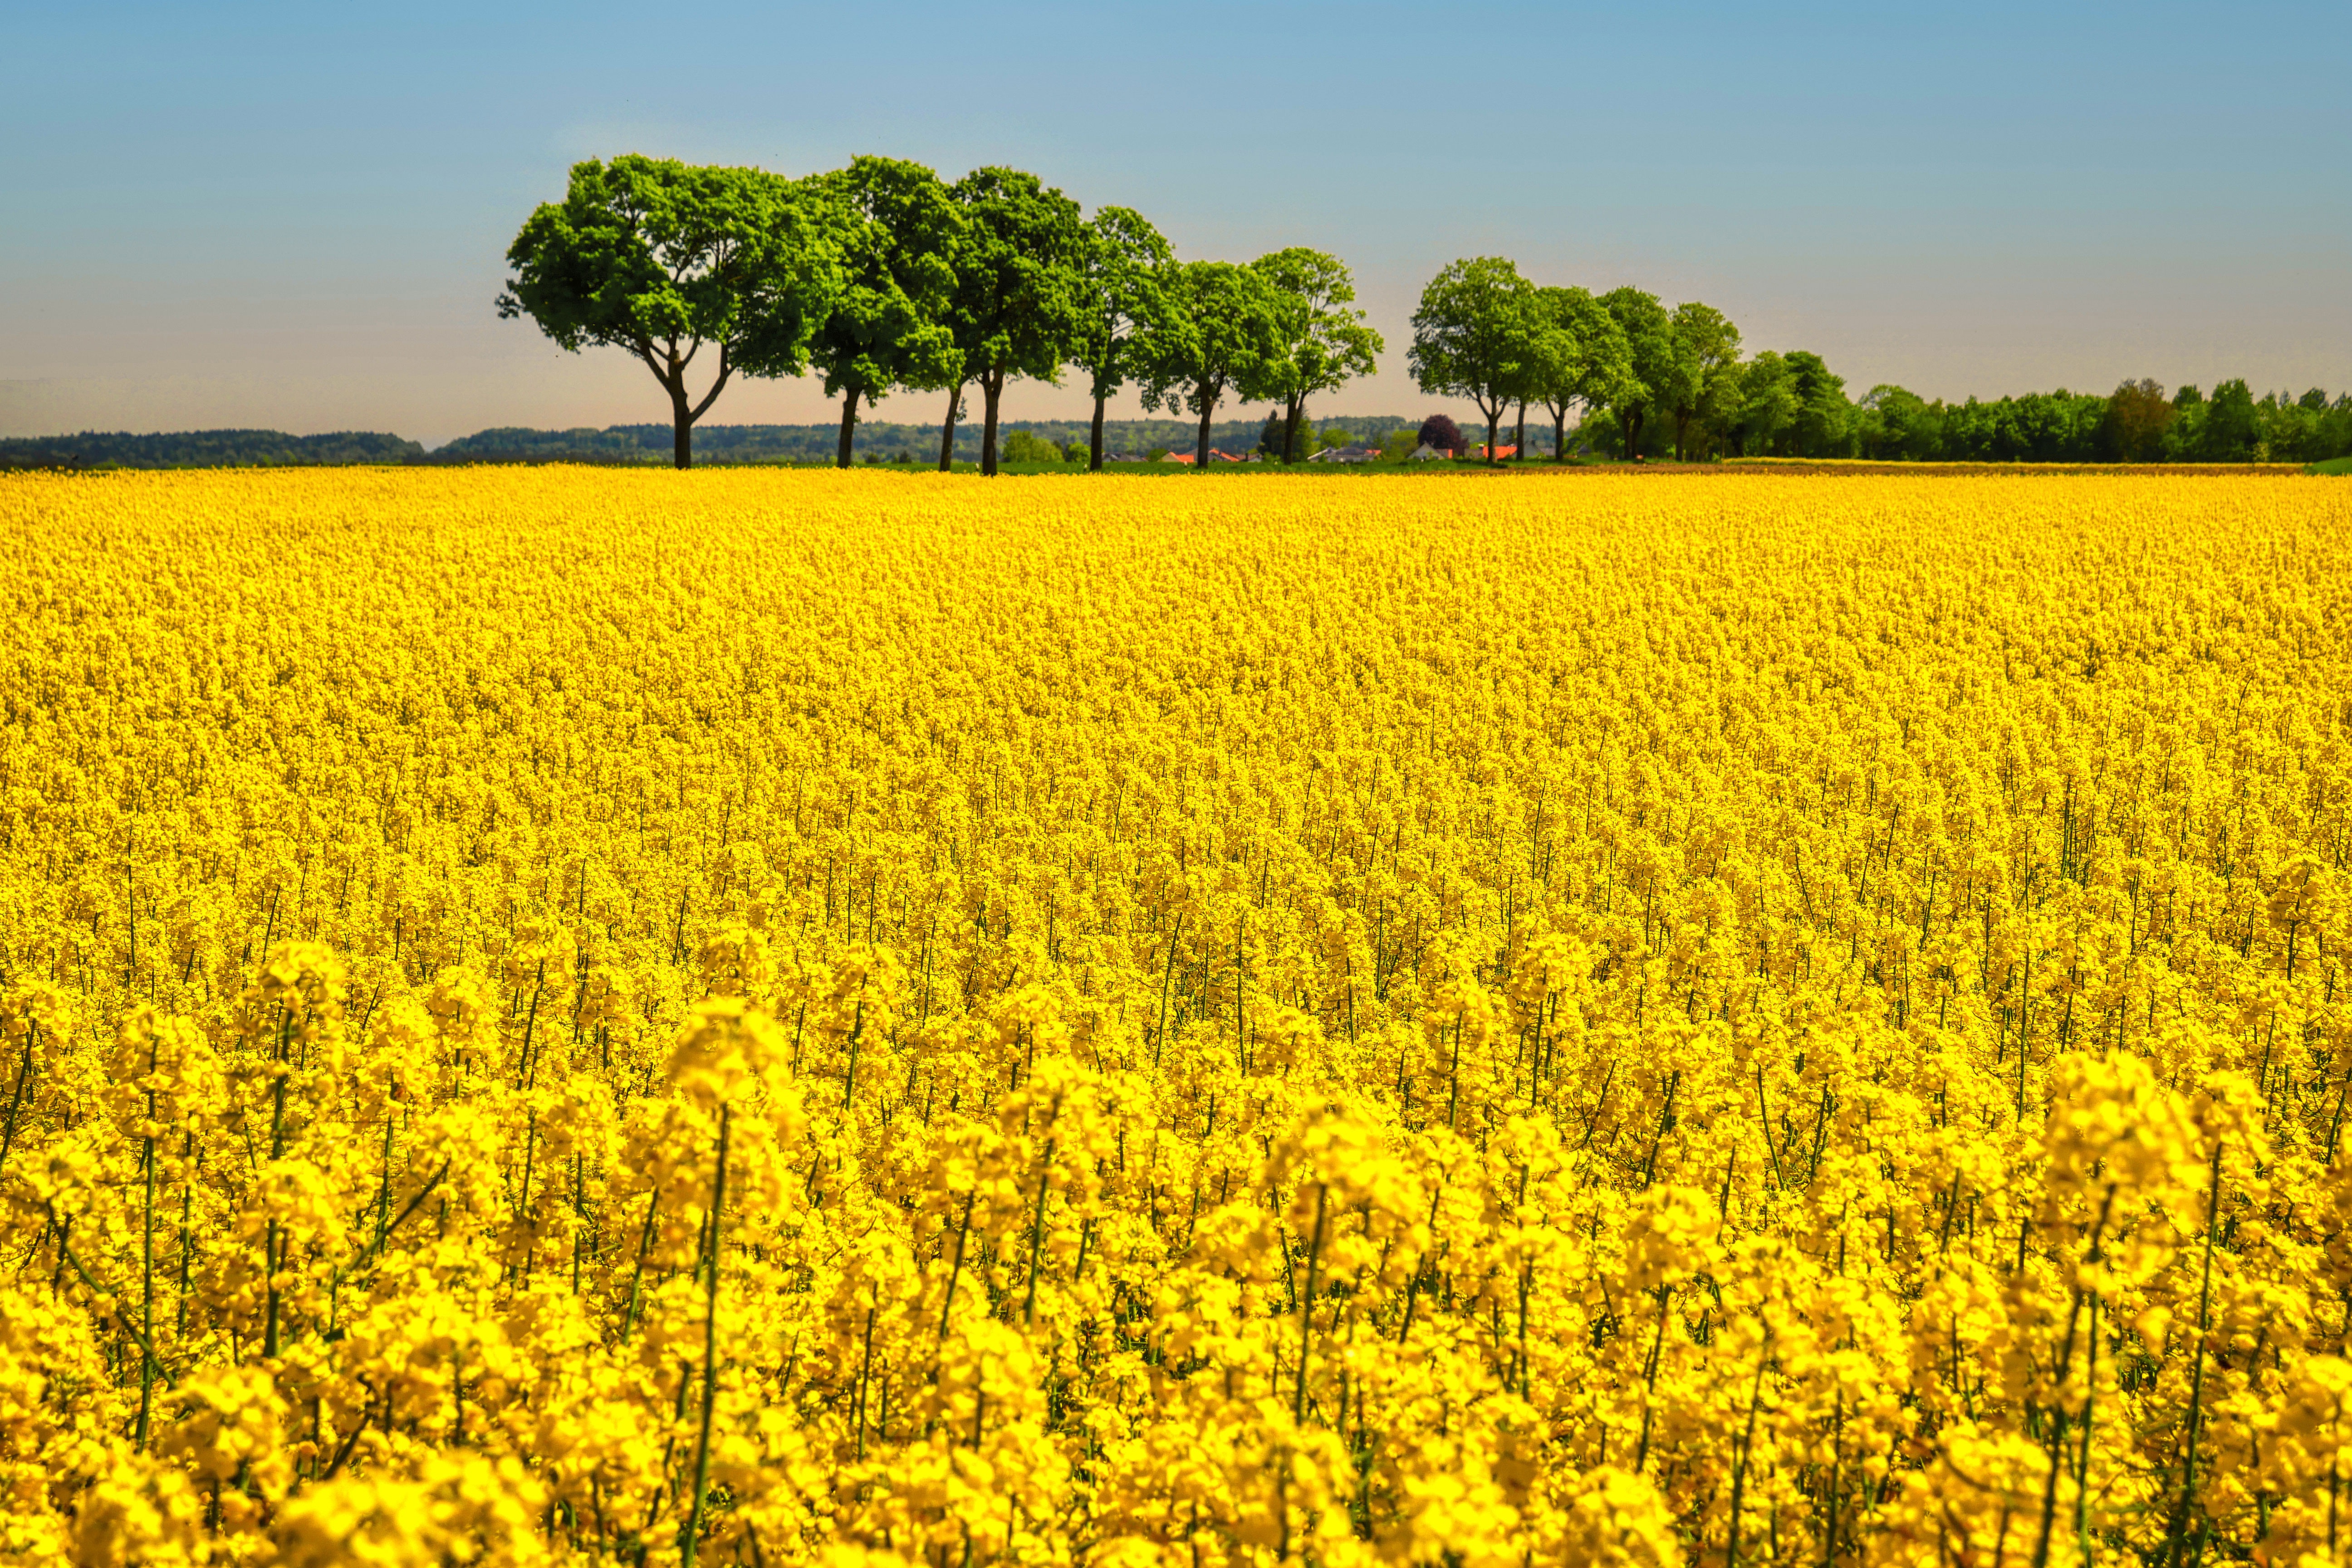 400+ 4K Yellow Flower Wallpapers | Background Images